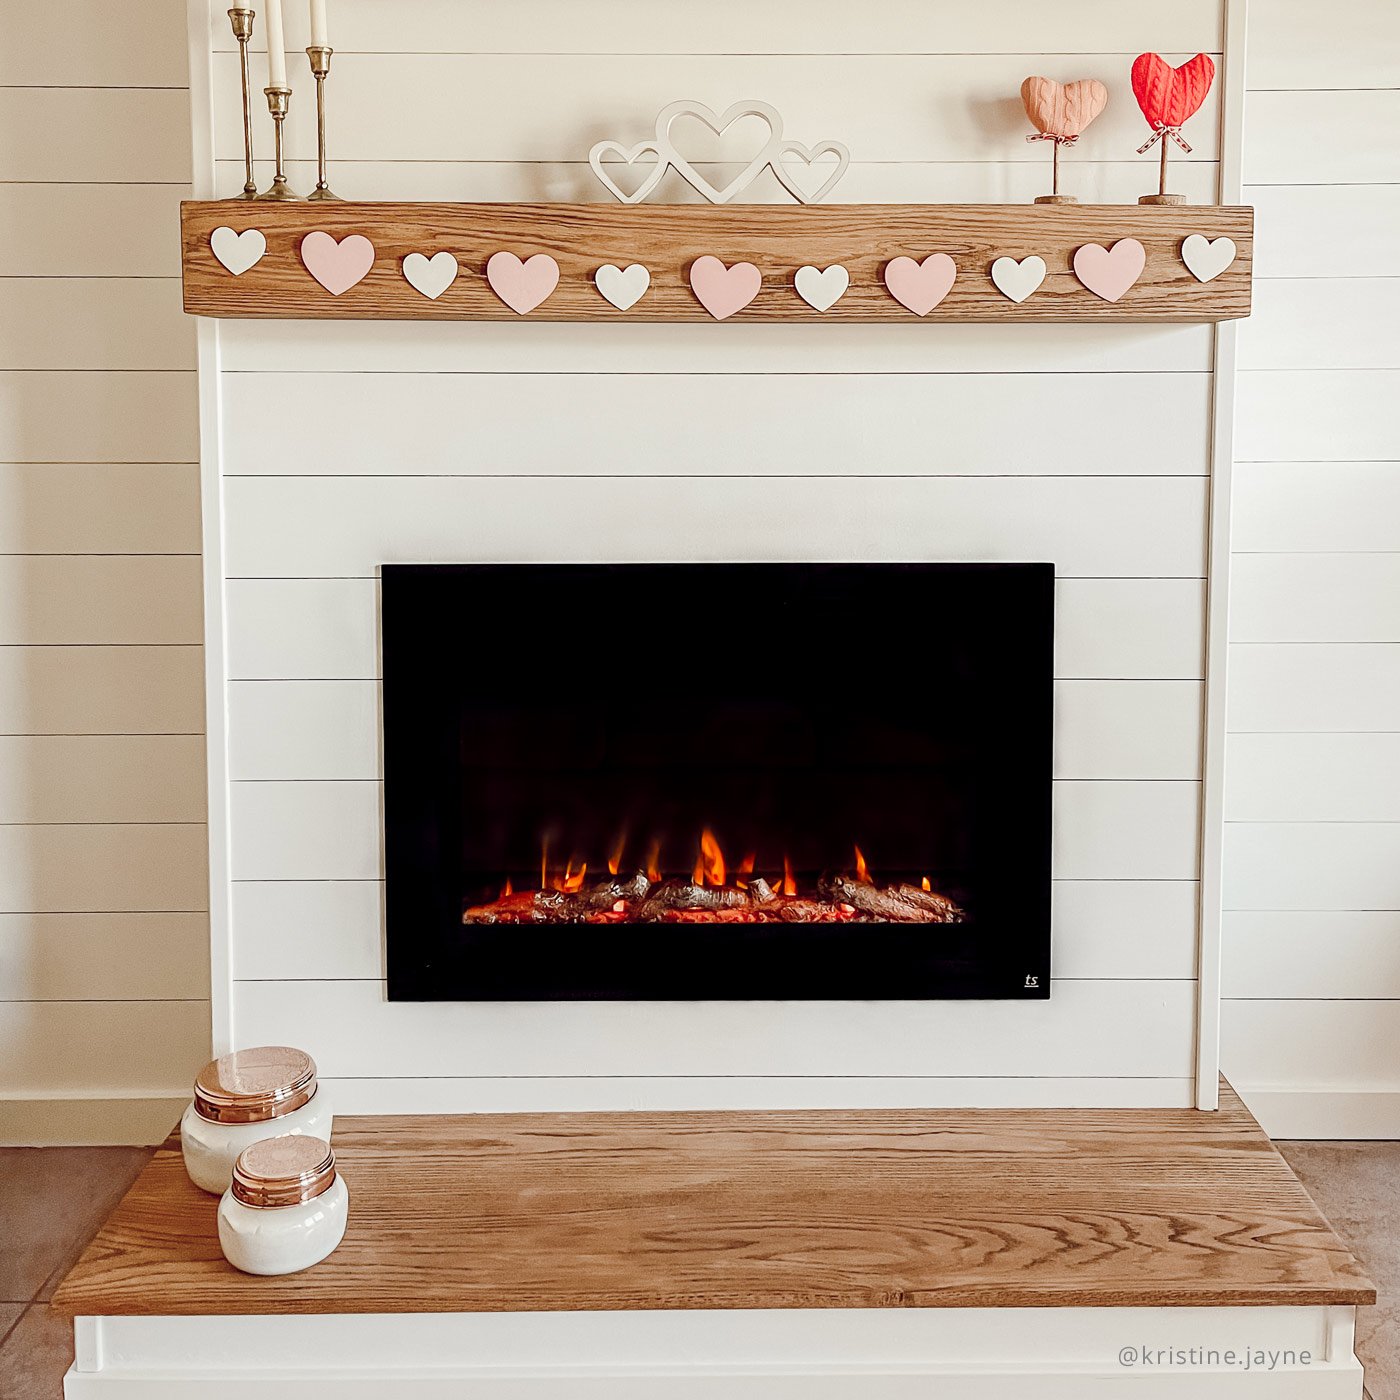 Touchstone Forte 80006 Electric Fireplace recessed in shiplap wall by @kristine.jayne